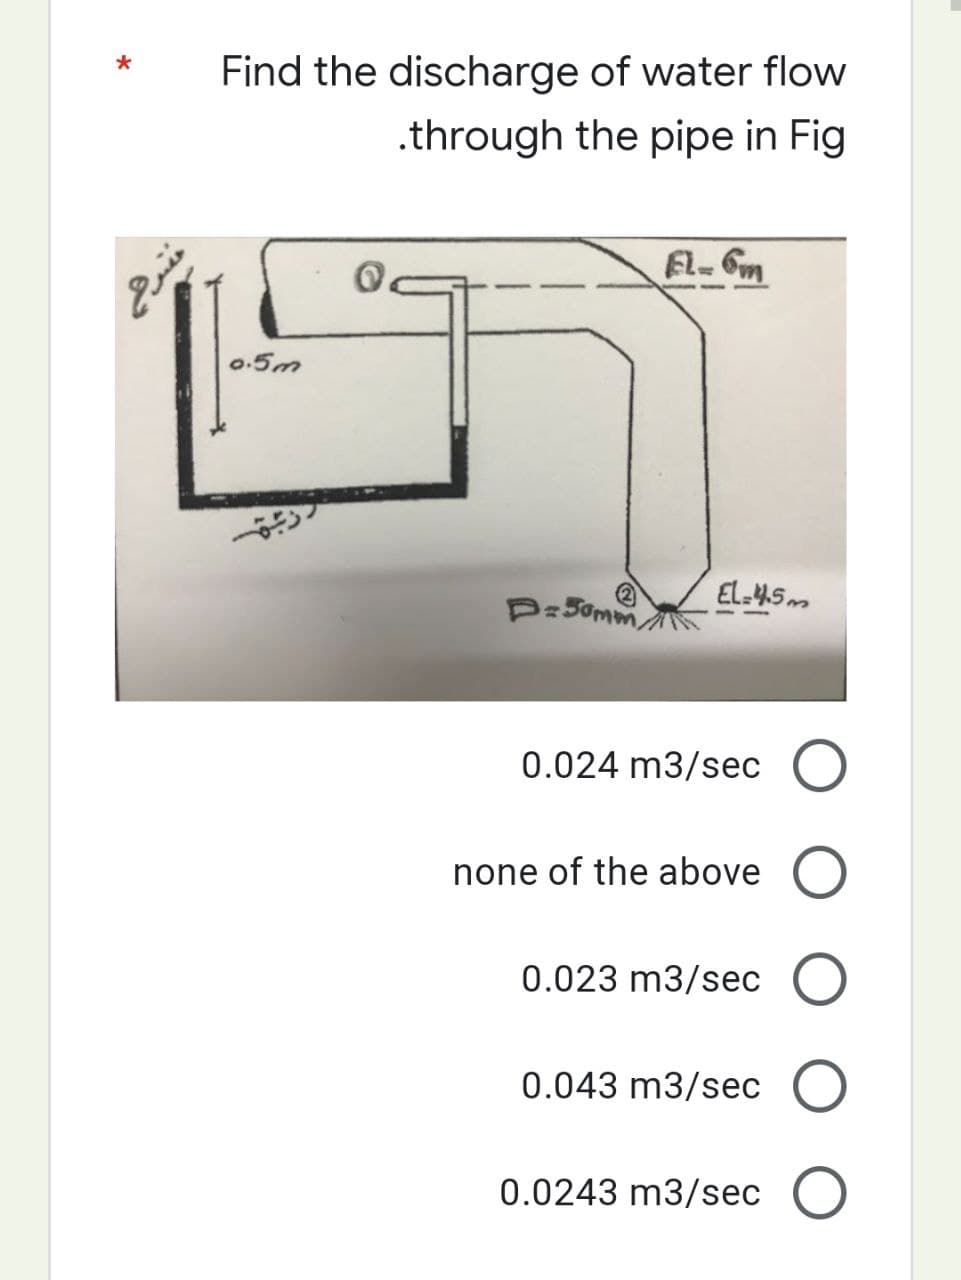 Find the discharge of water flow
.through the pipe in Fig
0.5m
D=50mm/
EL-6m
EL-4.5m
0.024 m3/sec O
none of the above O
0.023 m3/sec O
0.043 m3/sec O
0.0243 m3/sec O